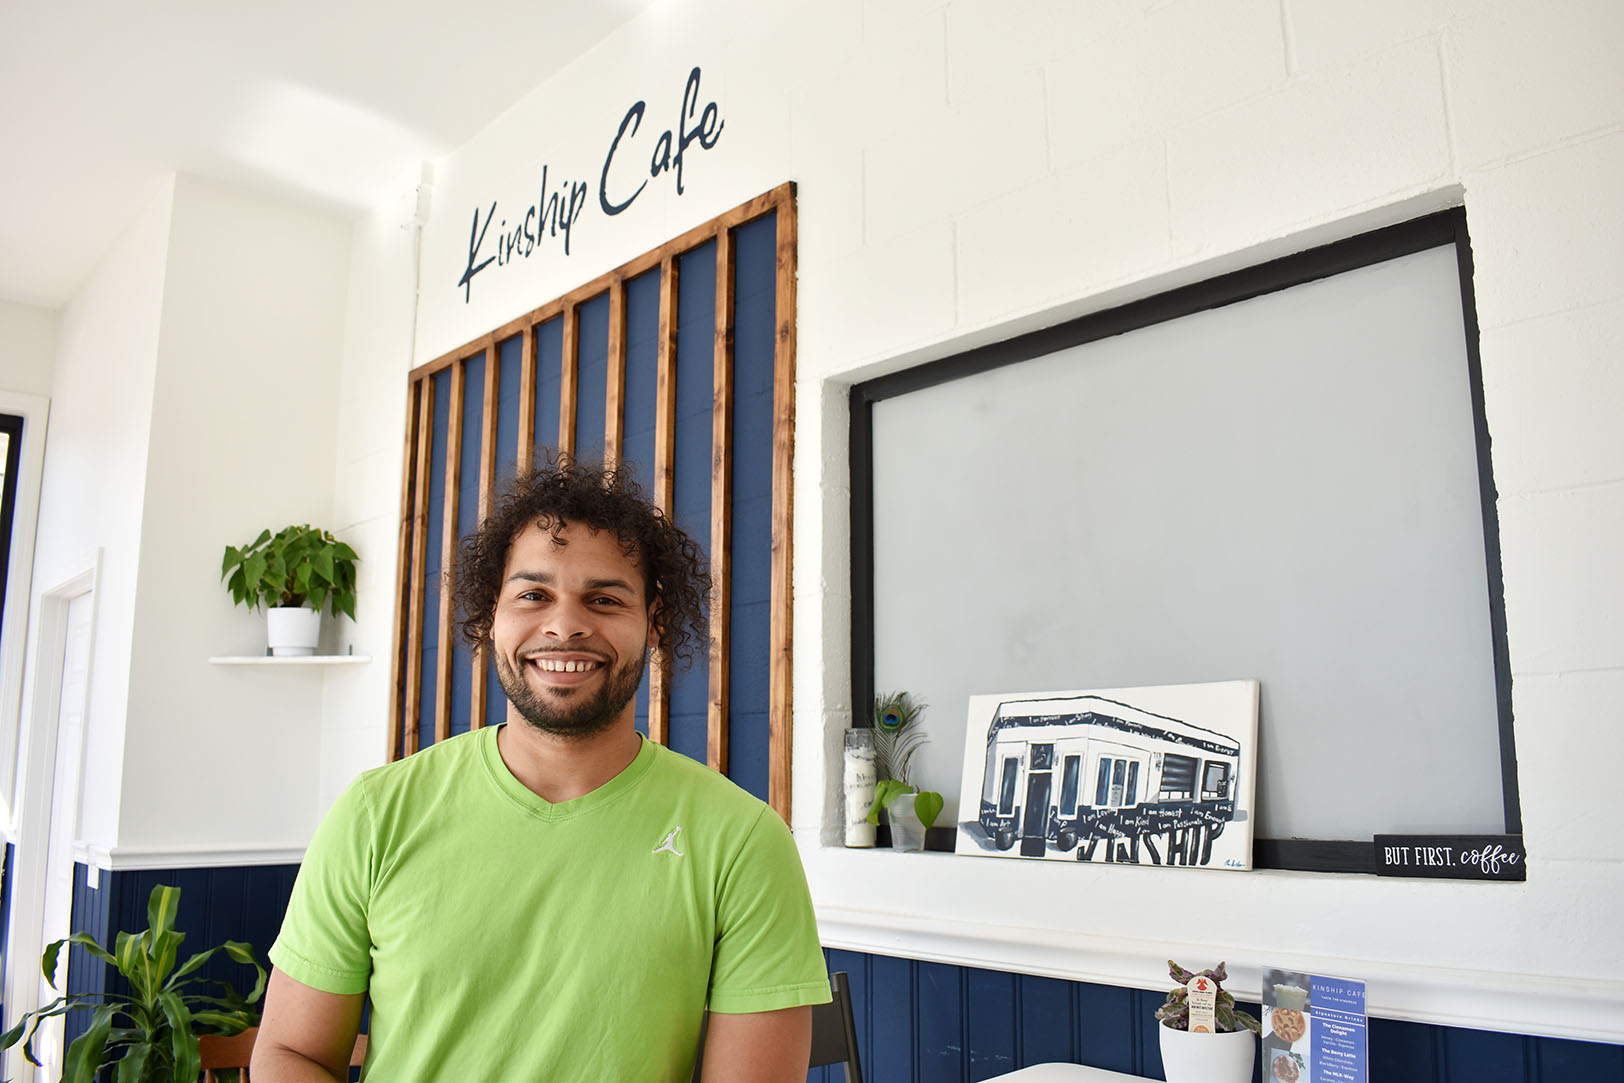 Kinship Cafe owner paves plans to take ownership of his coffee shop (with a little help from his community)